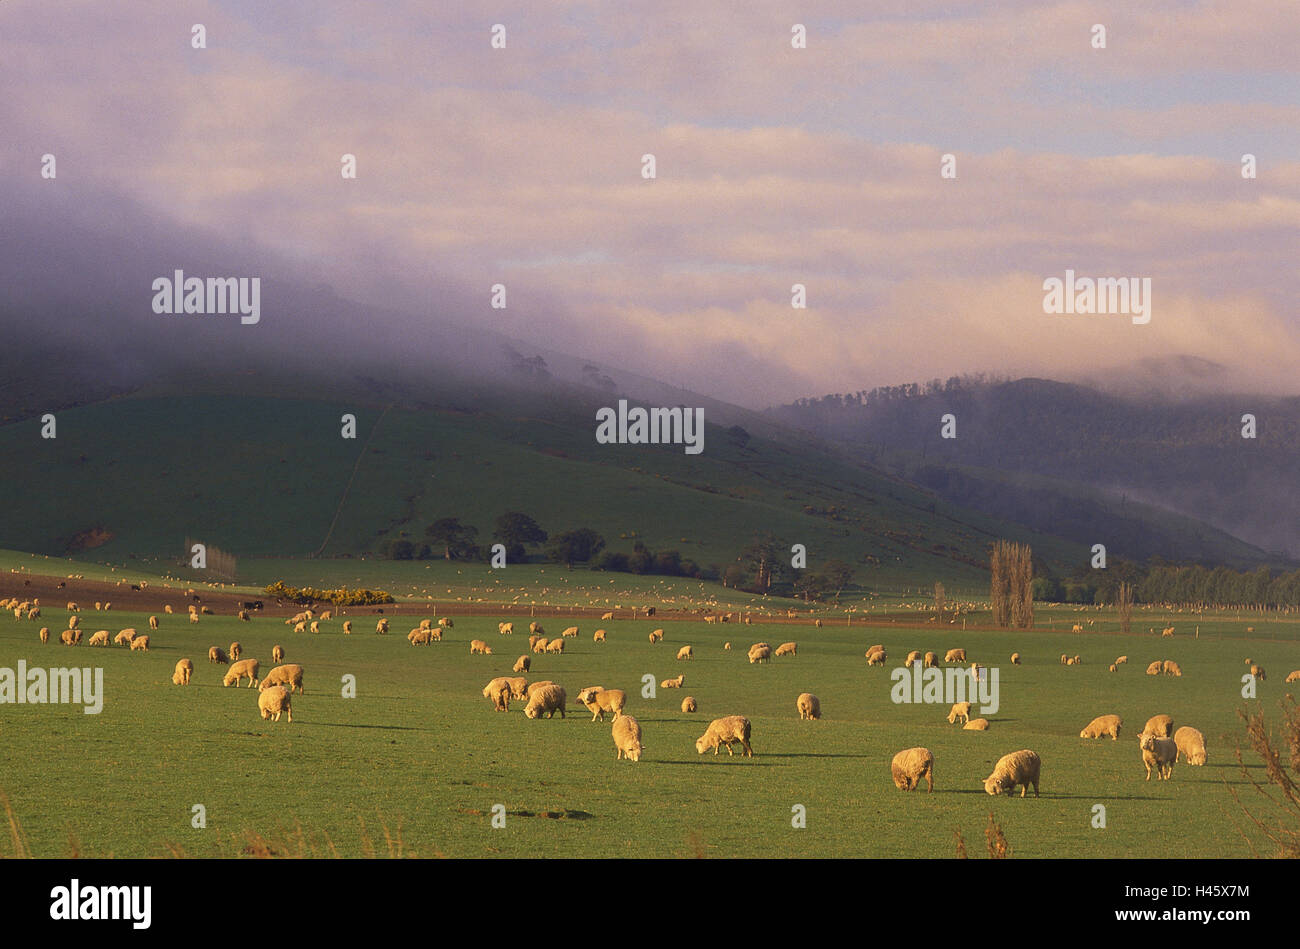 New Zealand, South Iceland, pasture, sheep, scenery, meadow, graze, heaven, cloudies, dusk, agriculture, grass, nature, cattle, field, Stock Photo